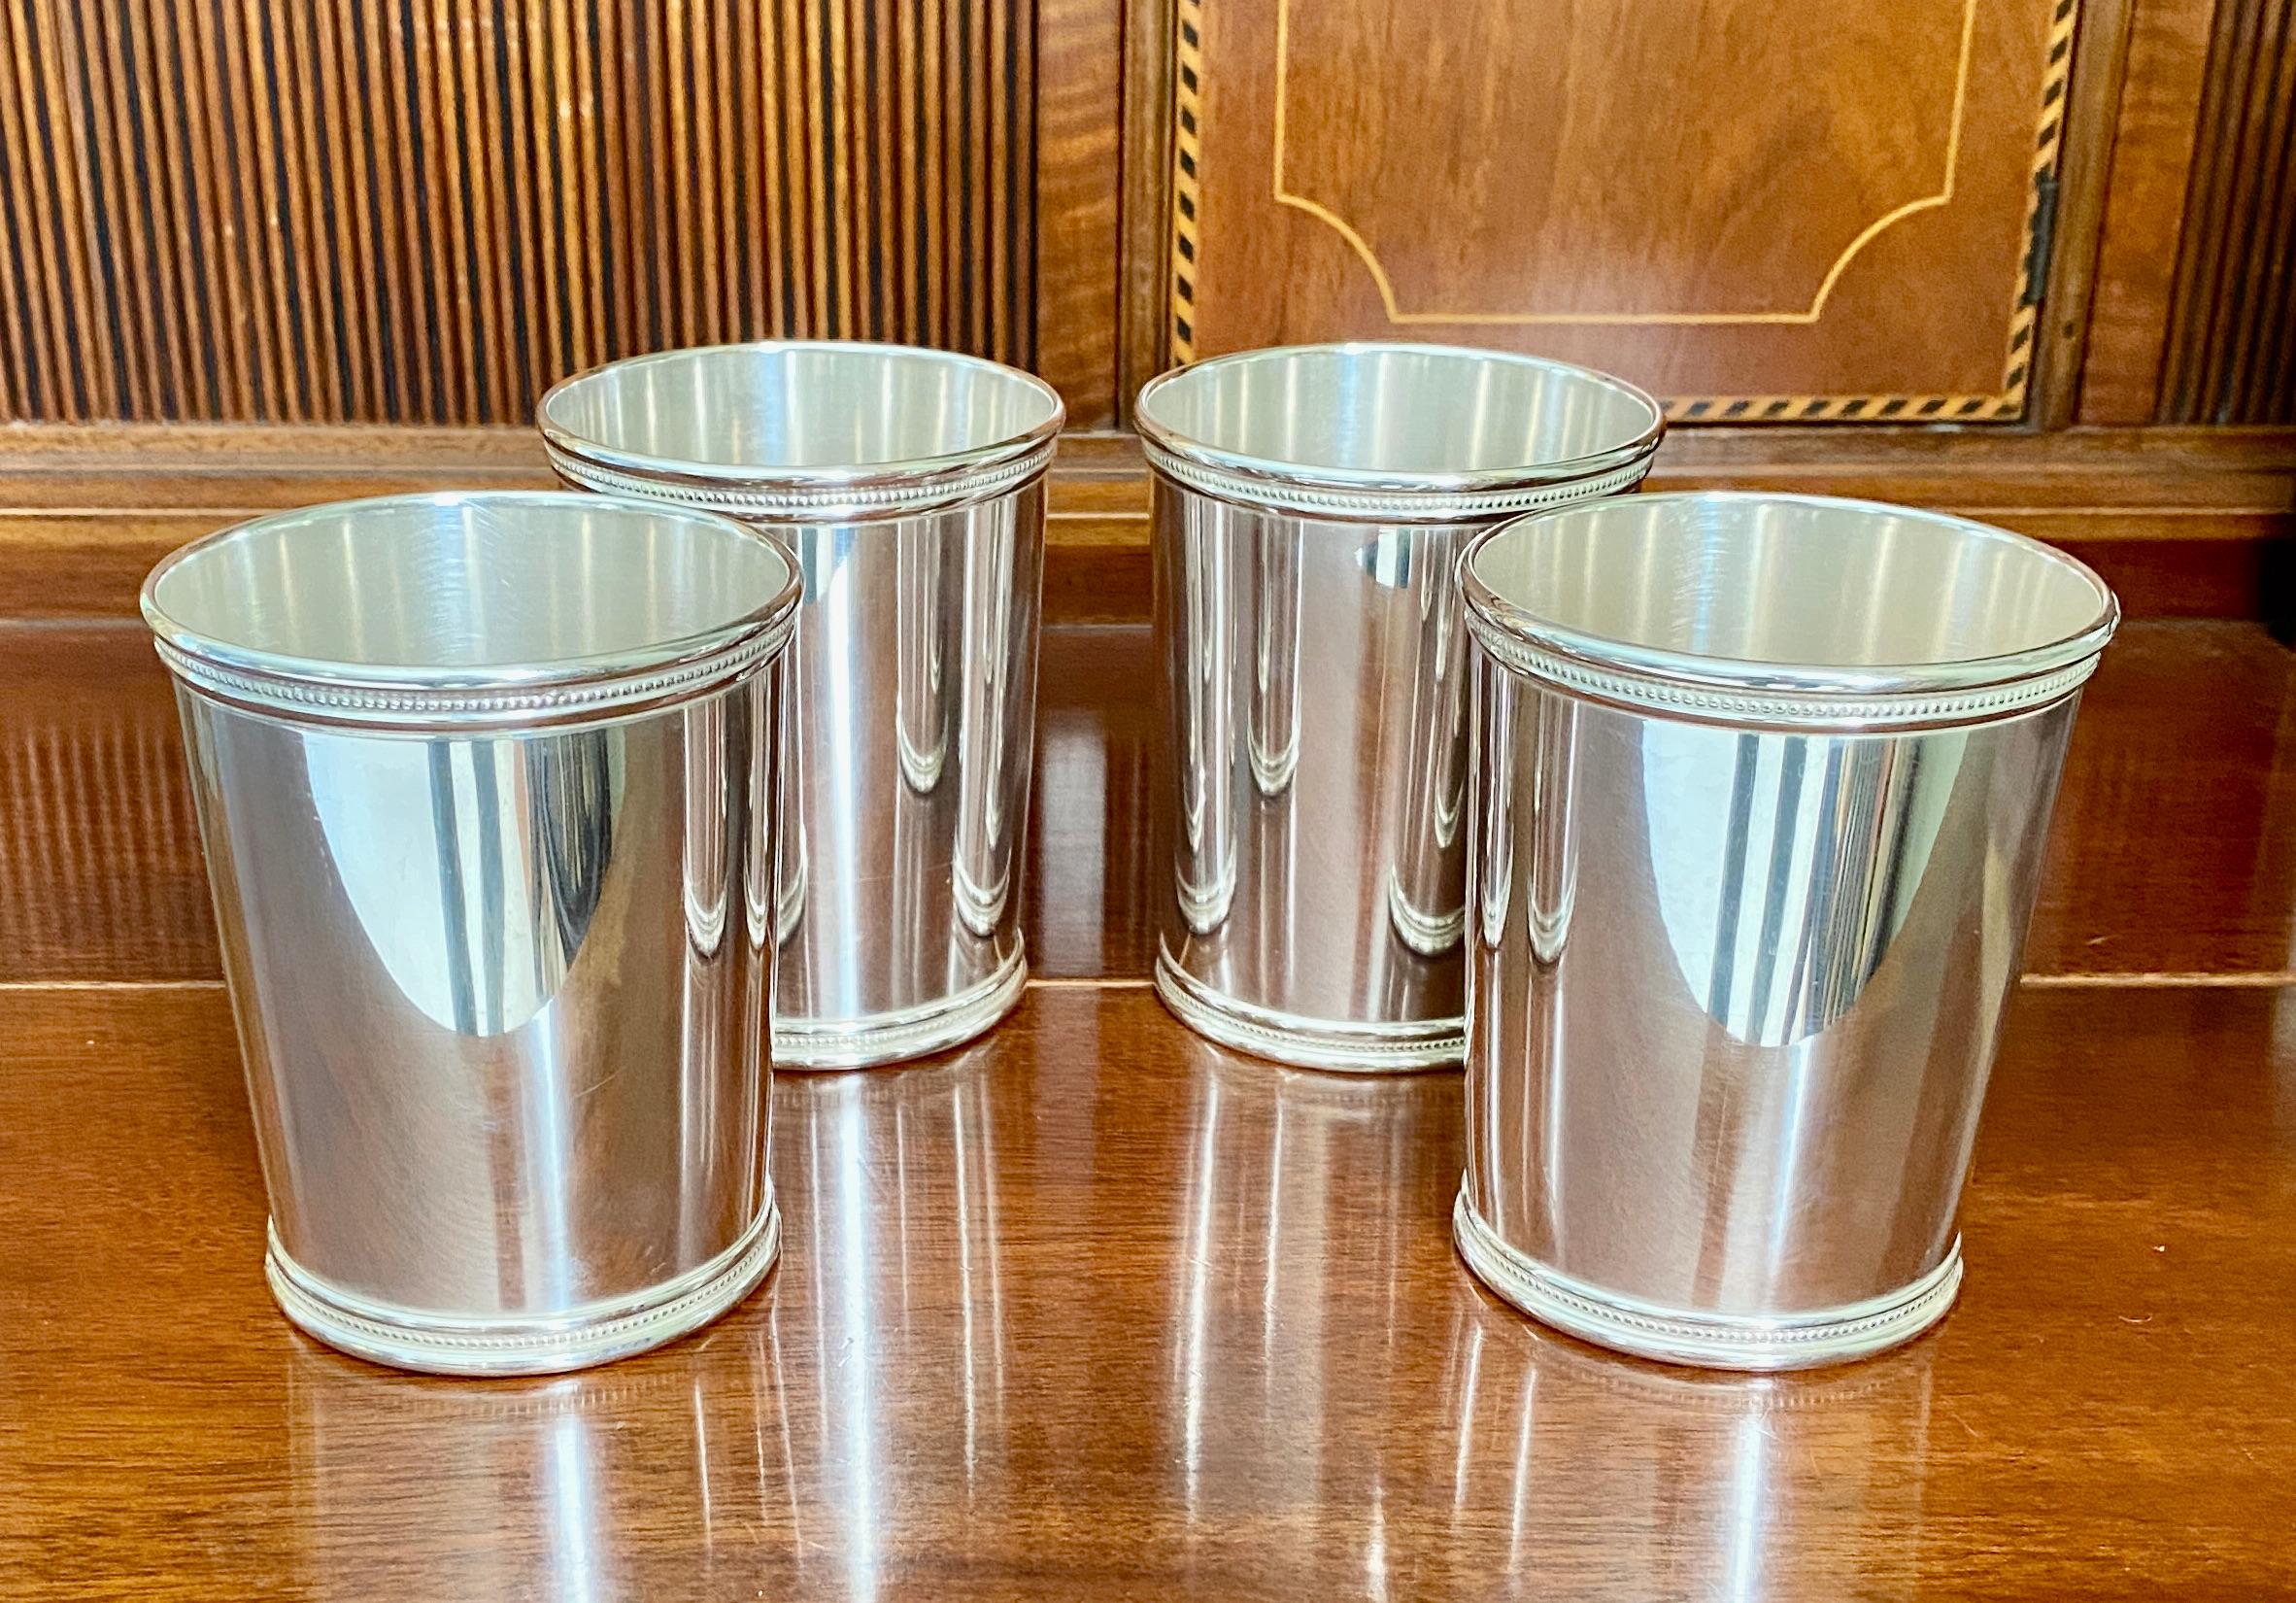 The silversmith Benjamin Trees was active in Lexington, Kentucky from 1934 until his death in 1965. His julep cups are highly sought-after by collectors today for their authenticity, purity of design and extremely high quality.

These four matching